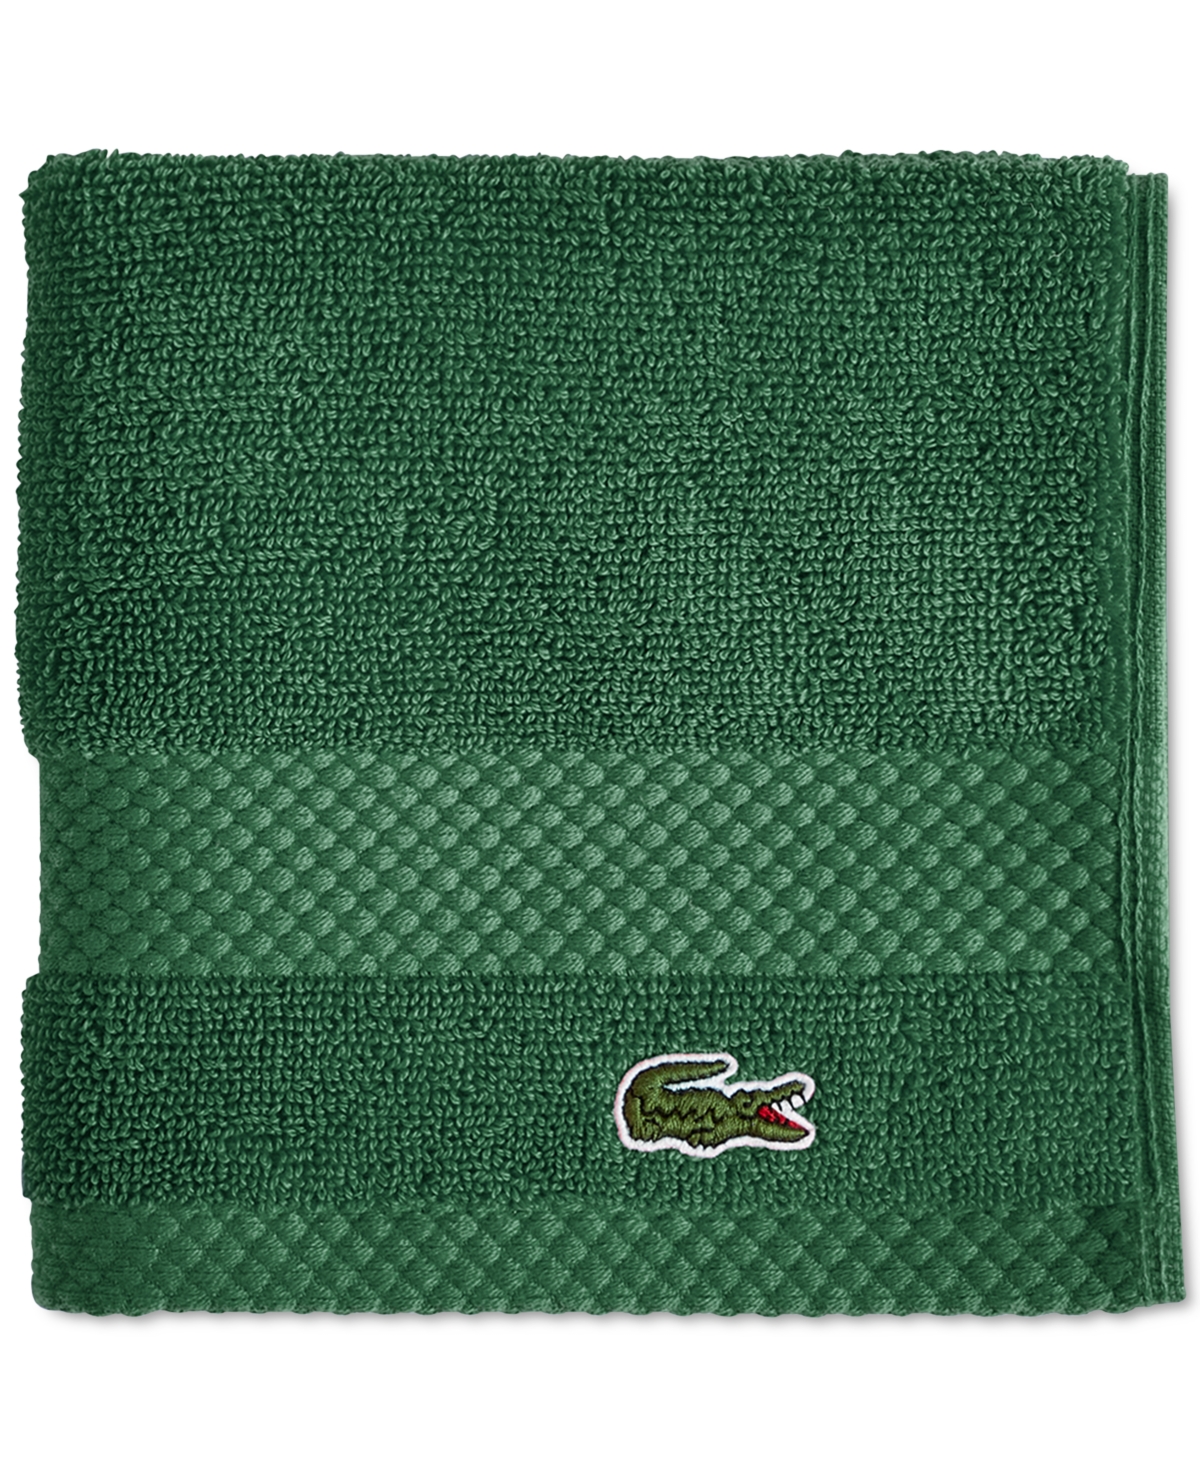 Lacoste Home Heritage Anti-microbial Supima Cotton Washcloth, 13" X 13" In Croc Green